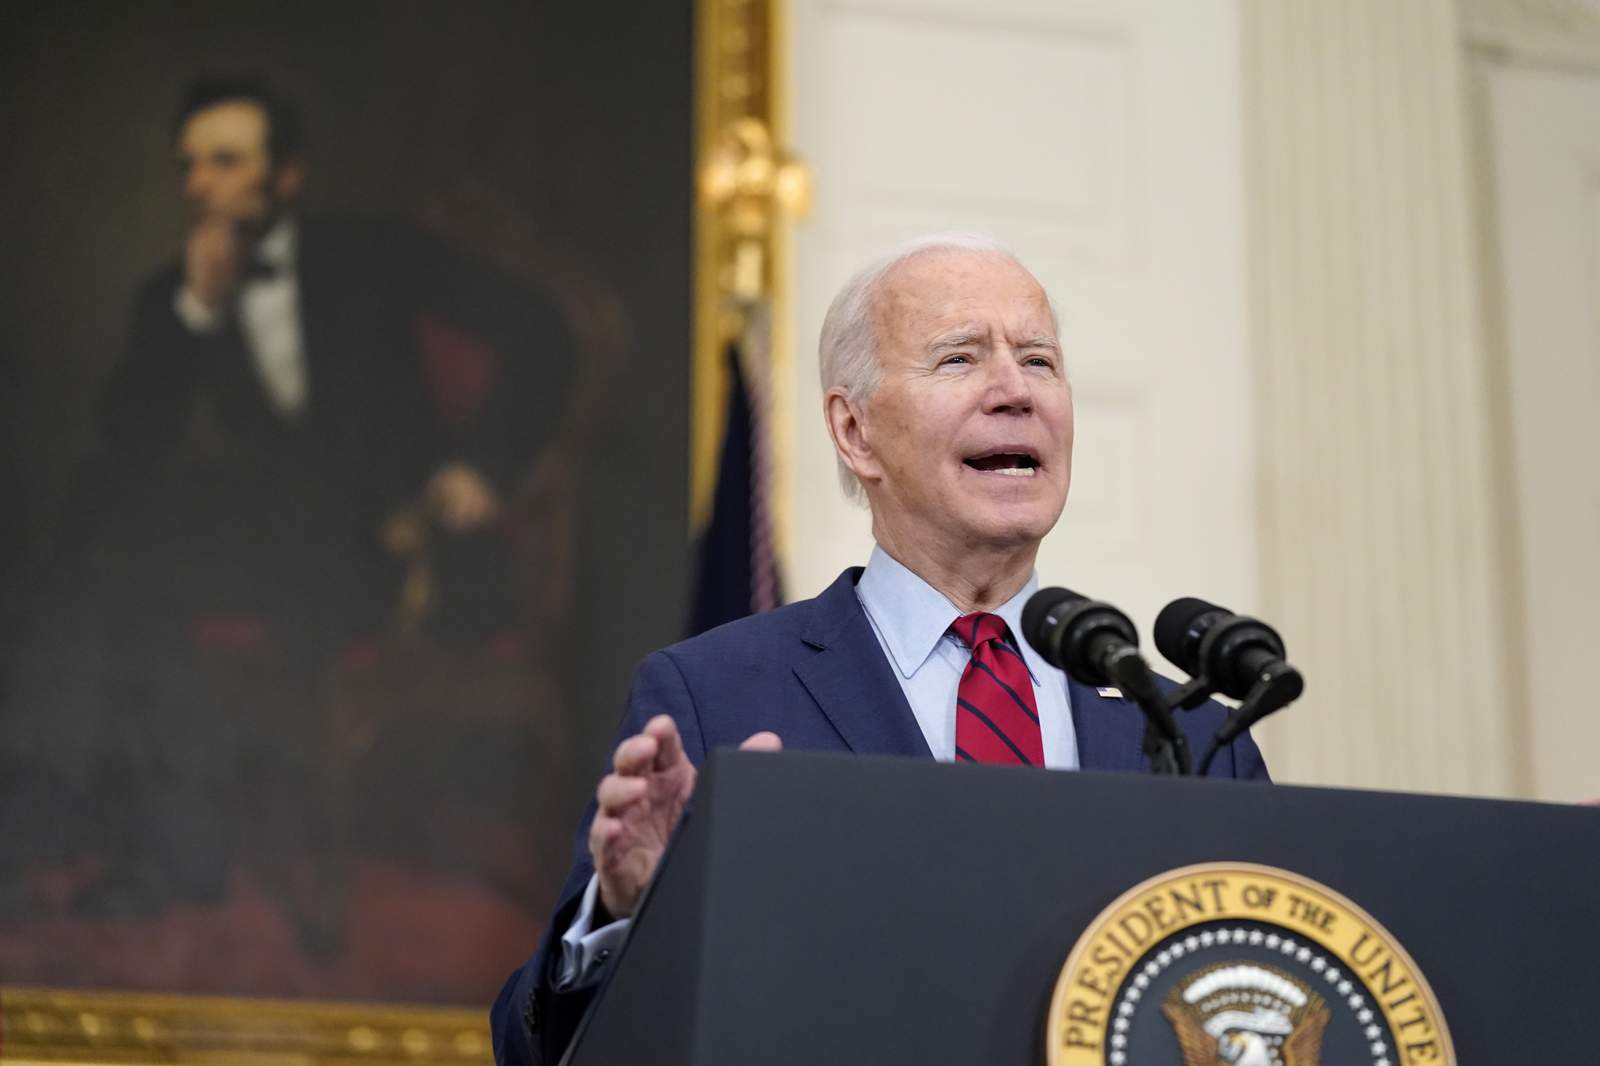 LIVE STREAM: Biden holds first press conference as president